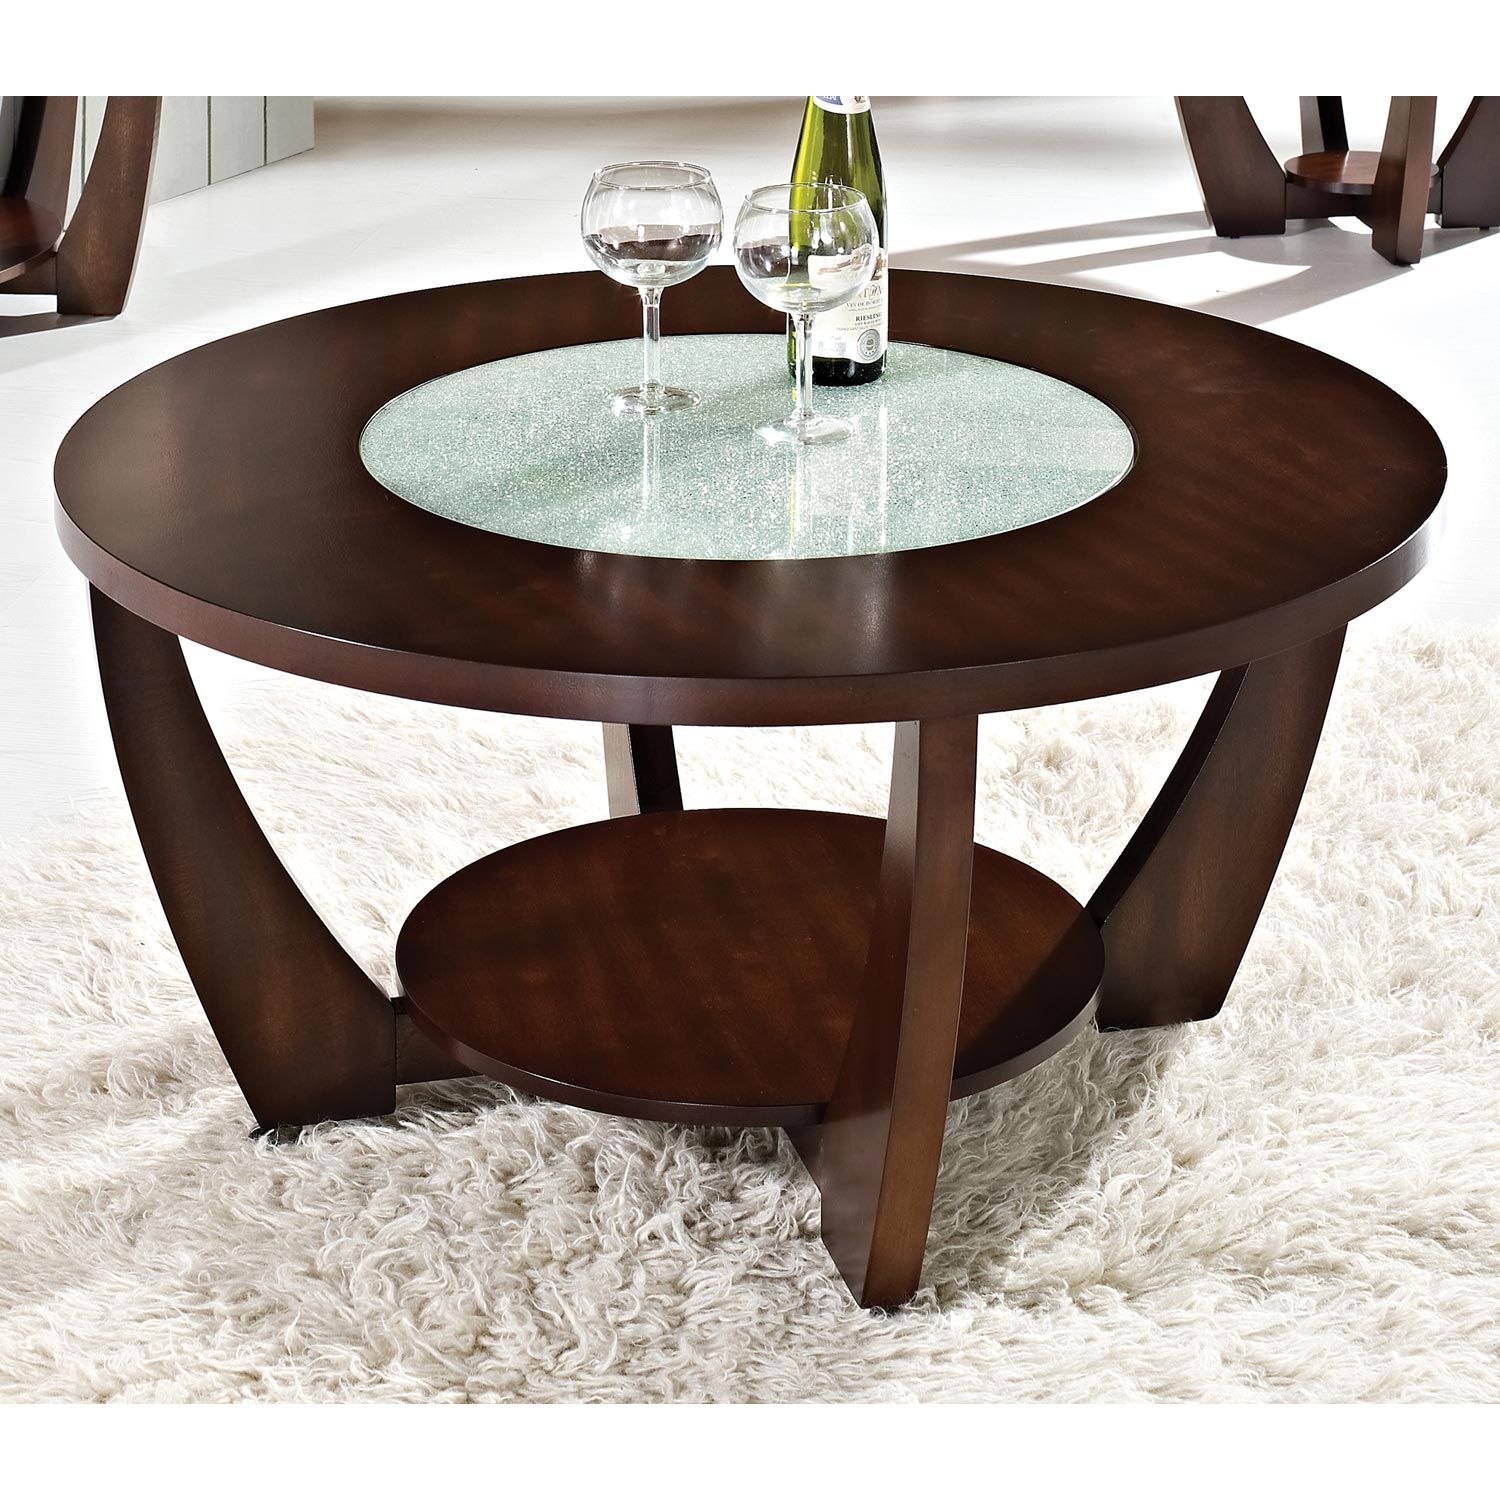 Rafael Round Coffee Table – Crackled Glass, Dark Cherry Wood | Dcg Stores Pertaining To Round Coffee Tables (Gallery 12 of 20)